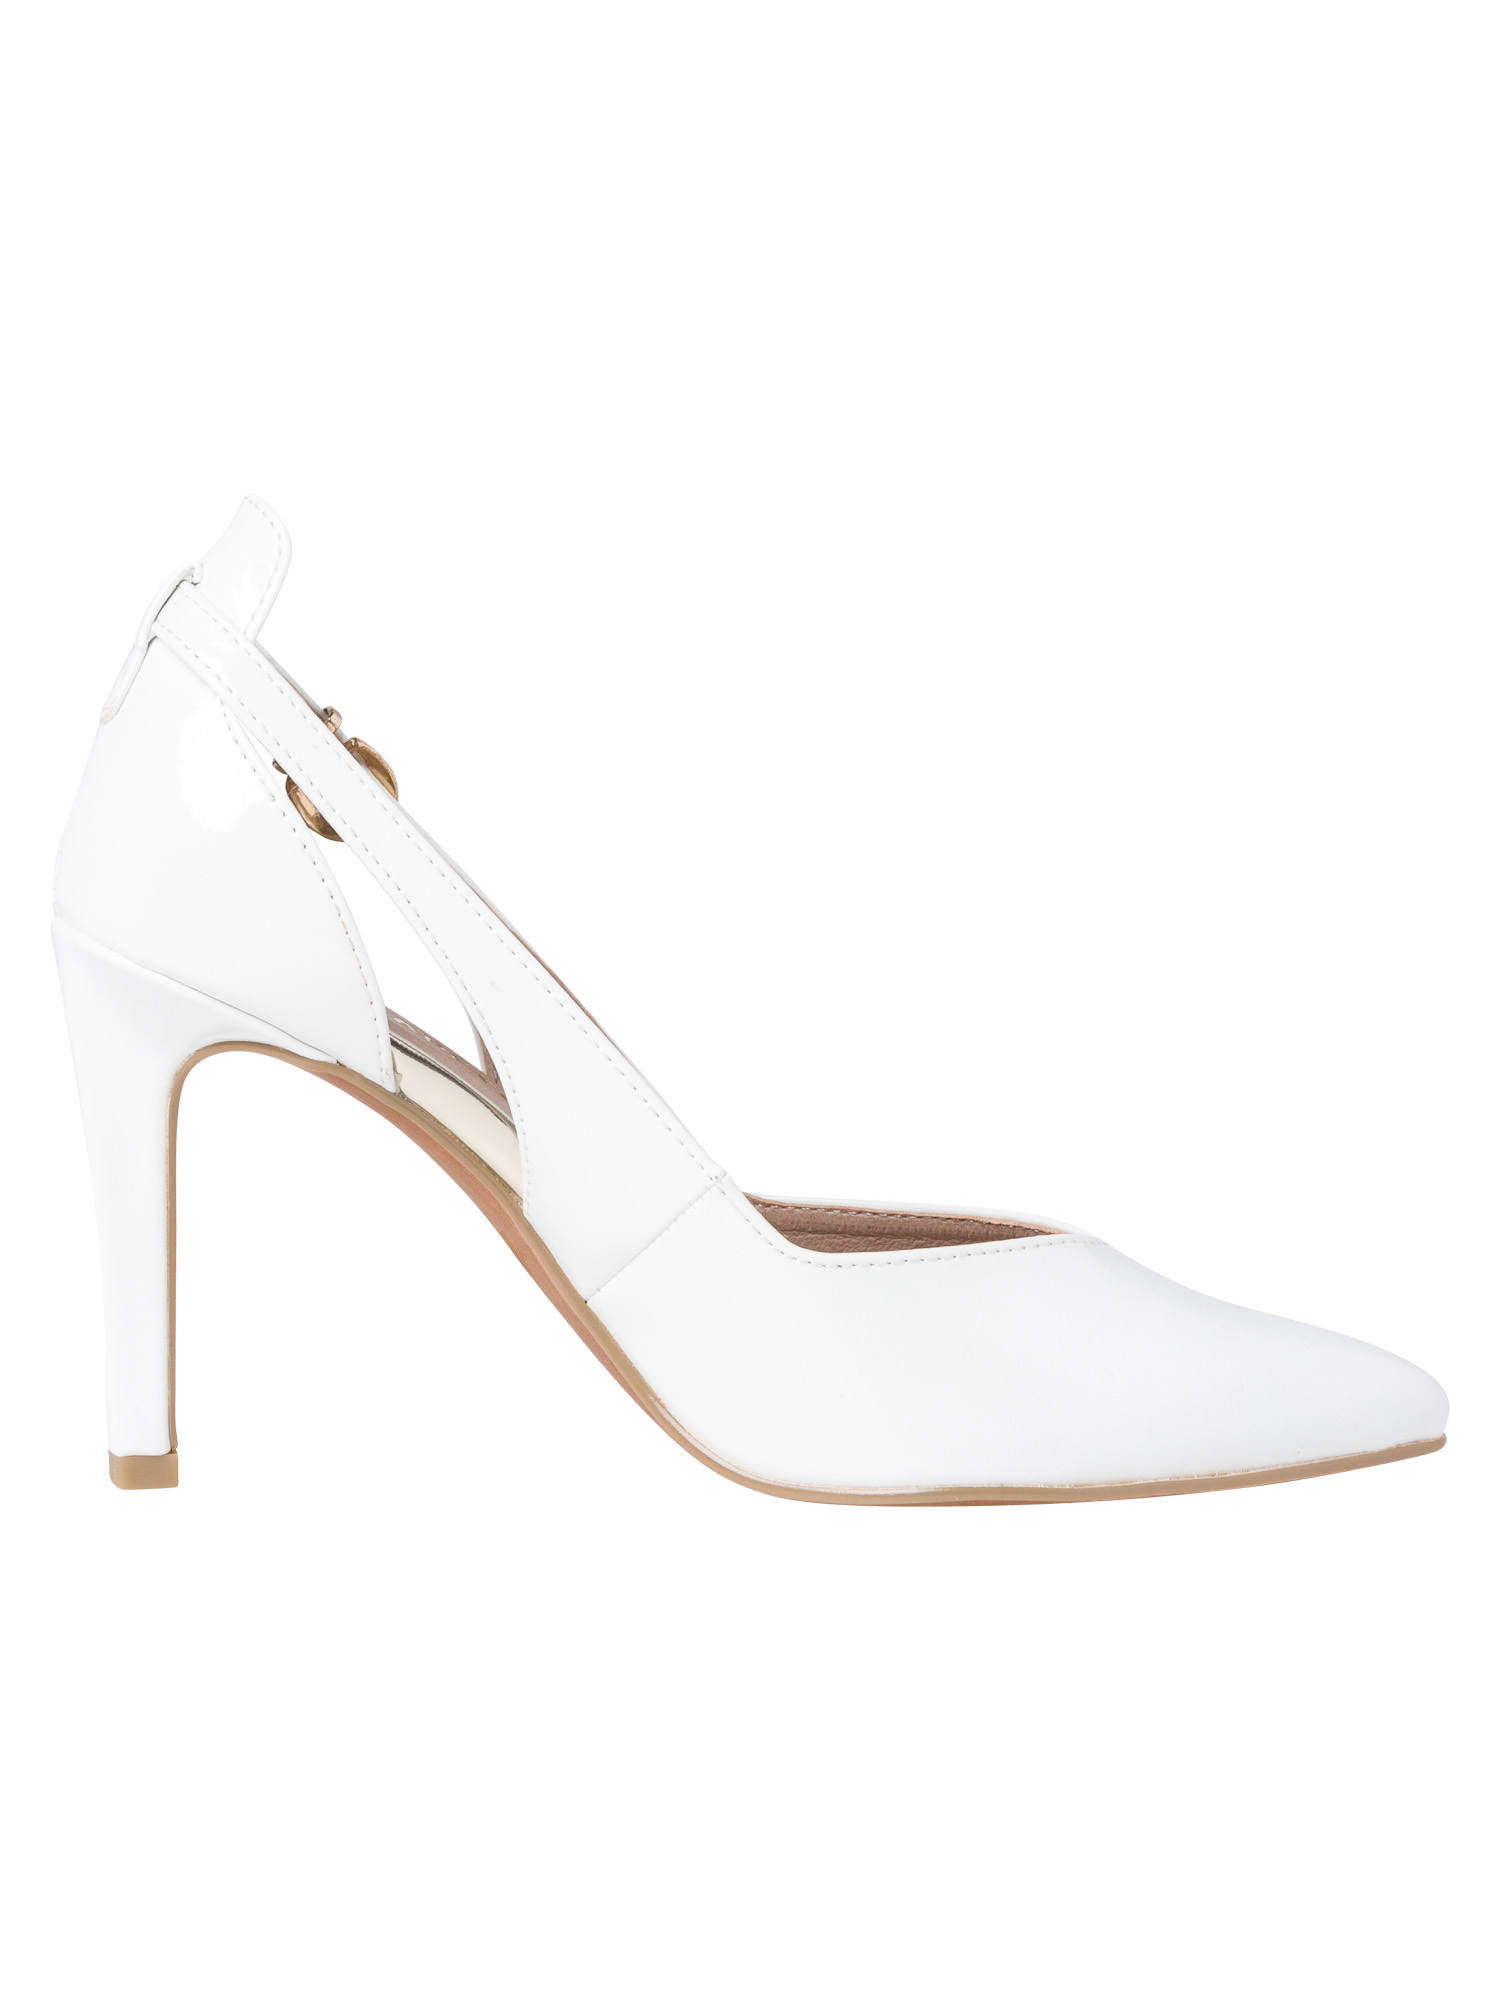 MARCO TOZZI Pumps in Offwhite 